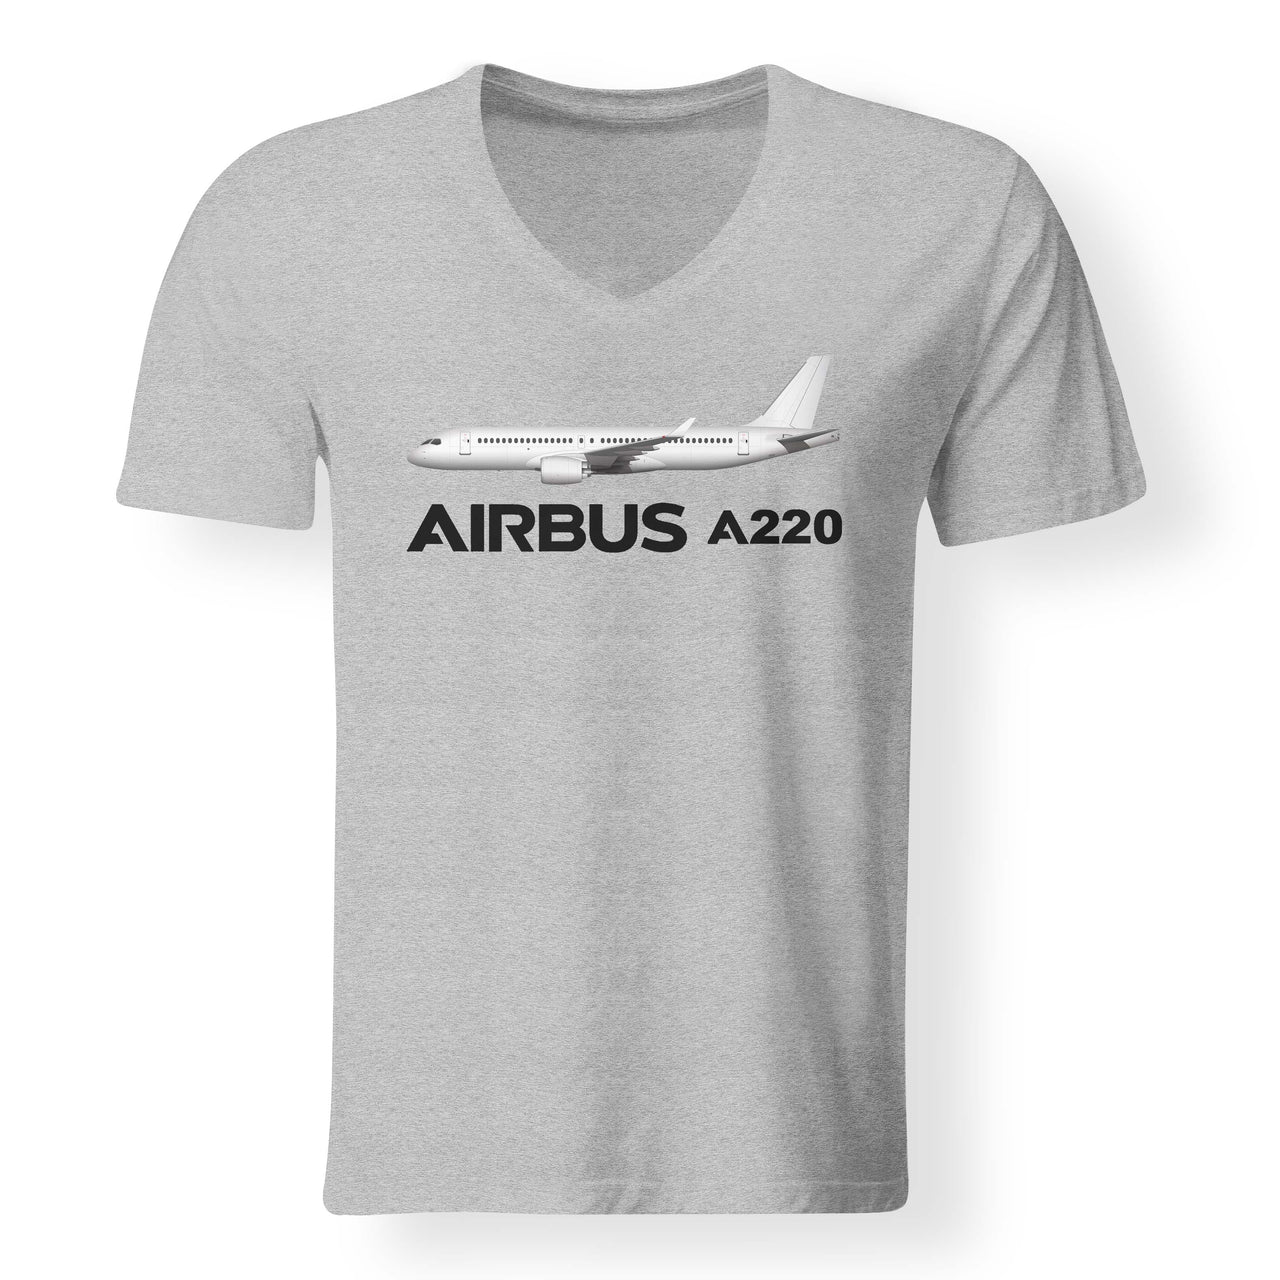 The Airbus A220 Designed V-Neck T-Shirts